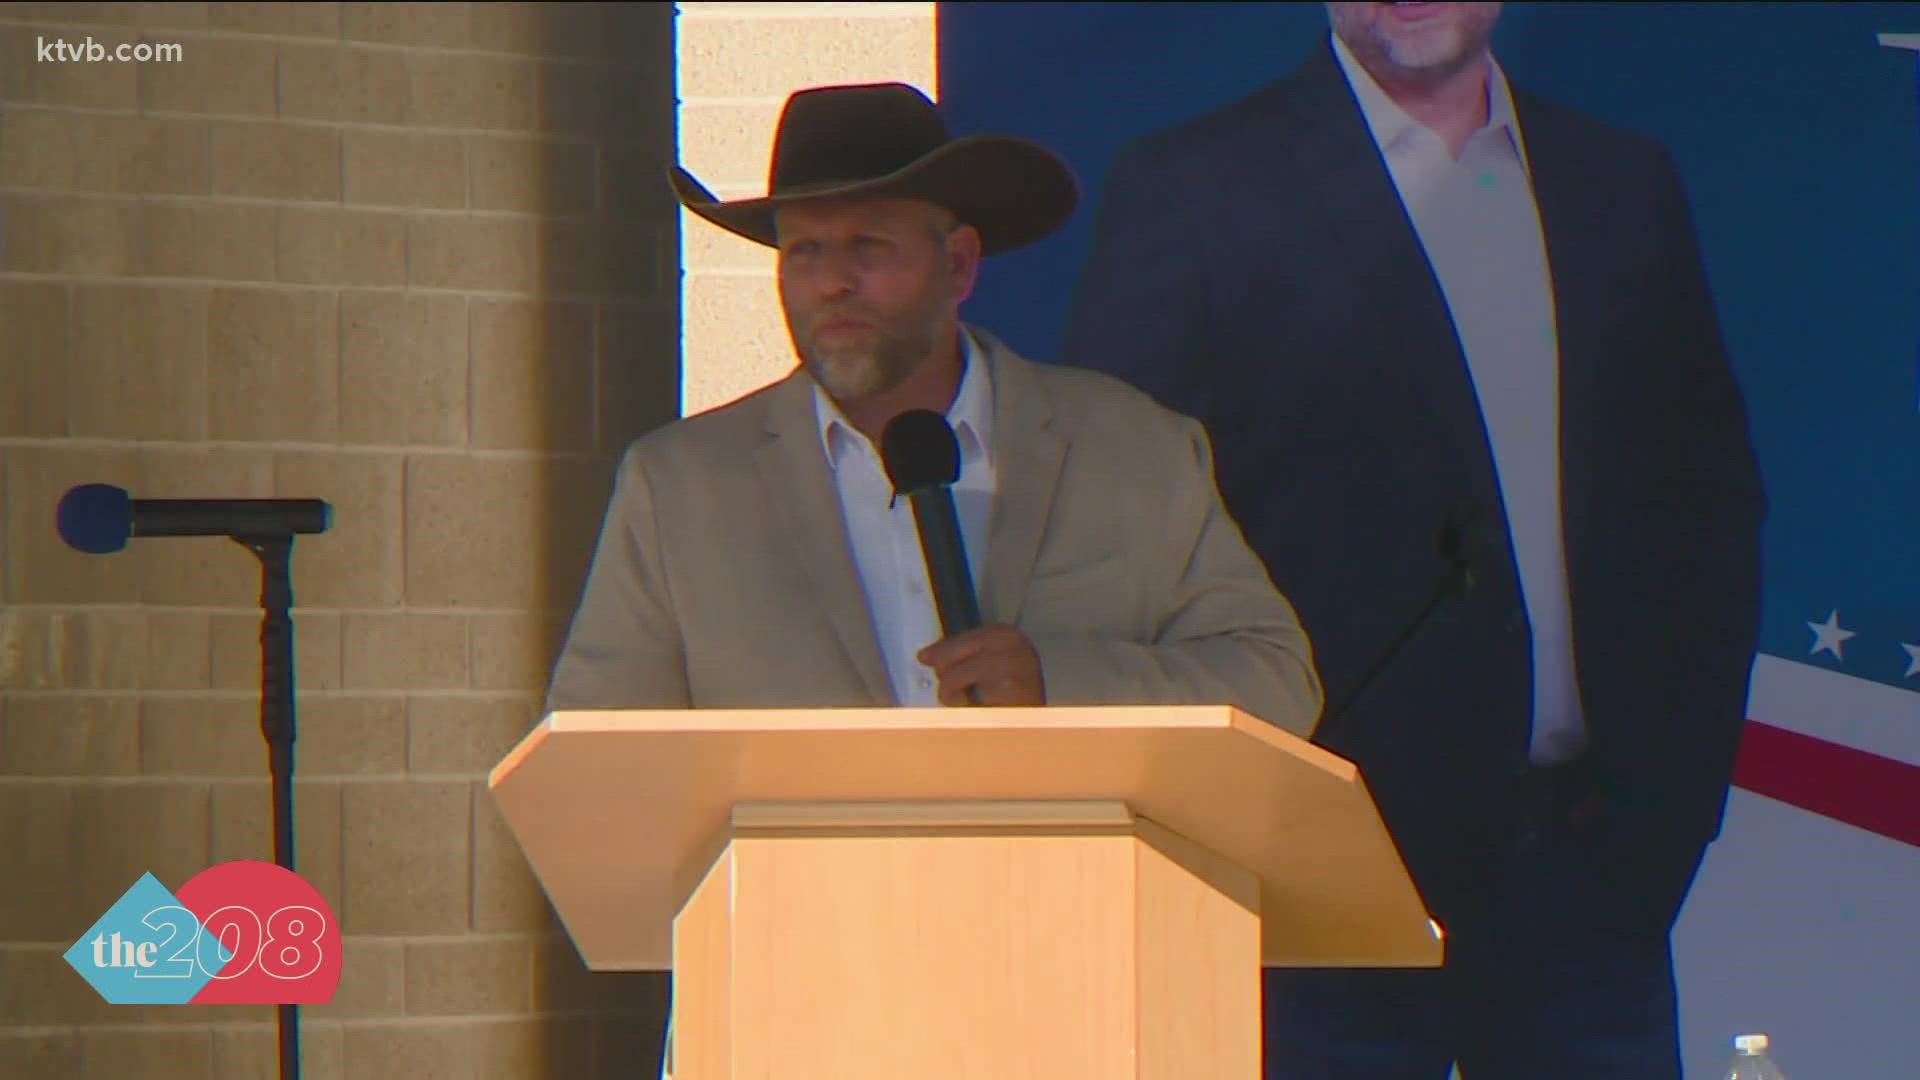 Ammon Bundy said Thursday that he won't run as a Republican, and he's not endorsing anyone in the upcoming primary.